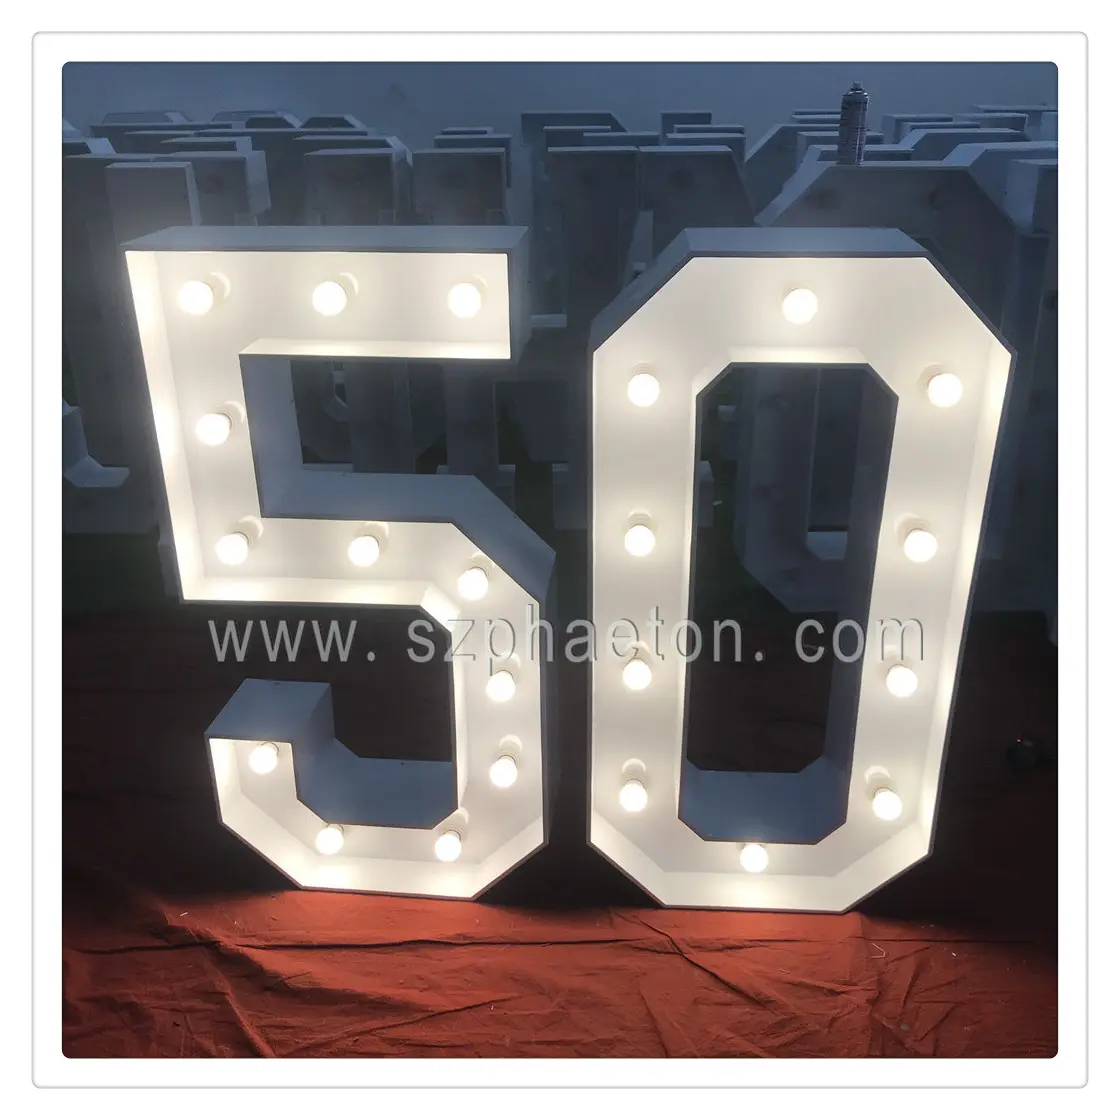 Balloon party decoration giant marquee numbers 50 for rental, free standing 3d marquee number lights for birthday party supplies